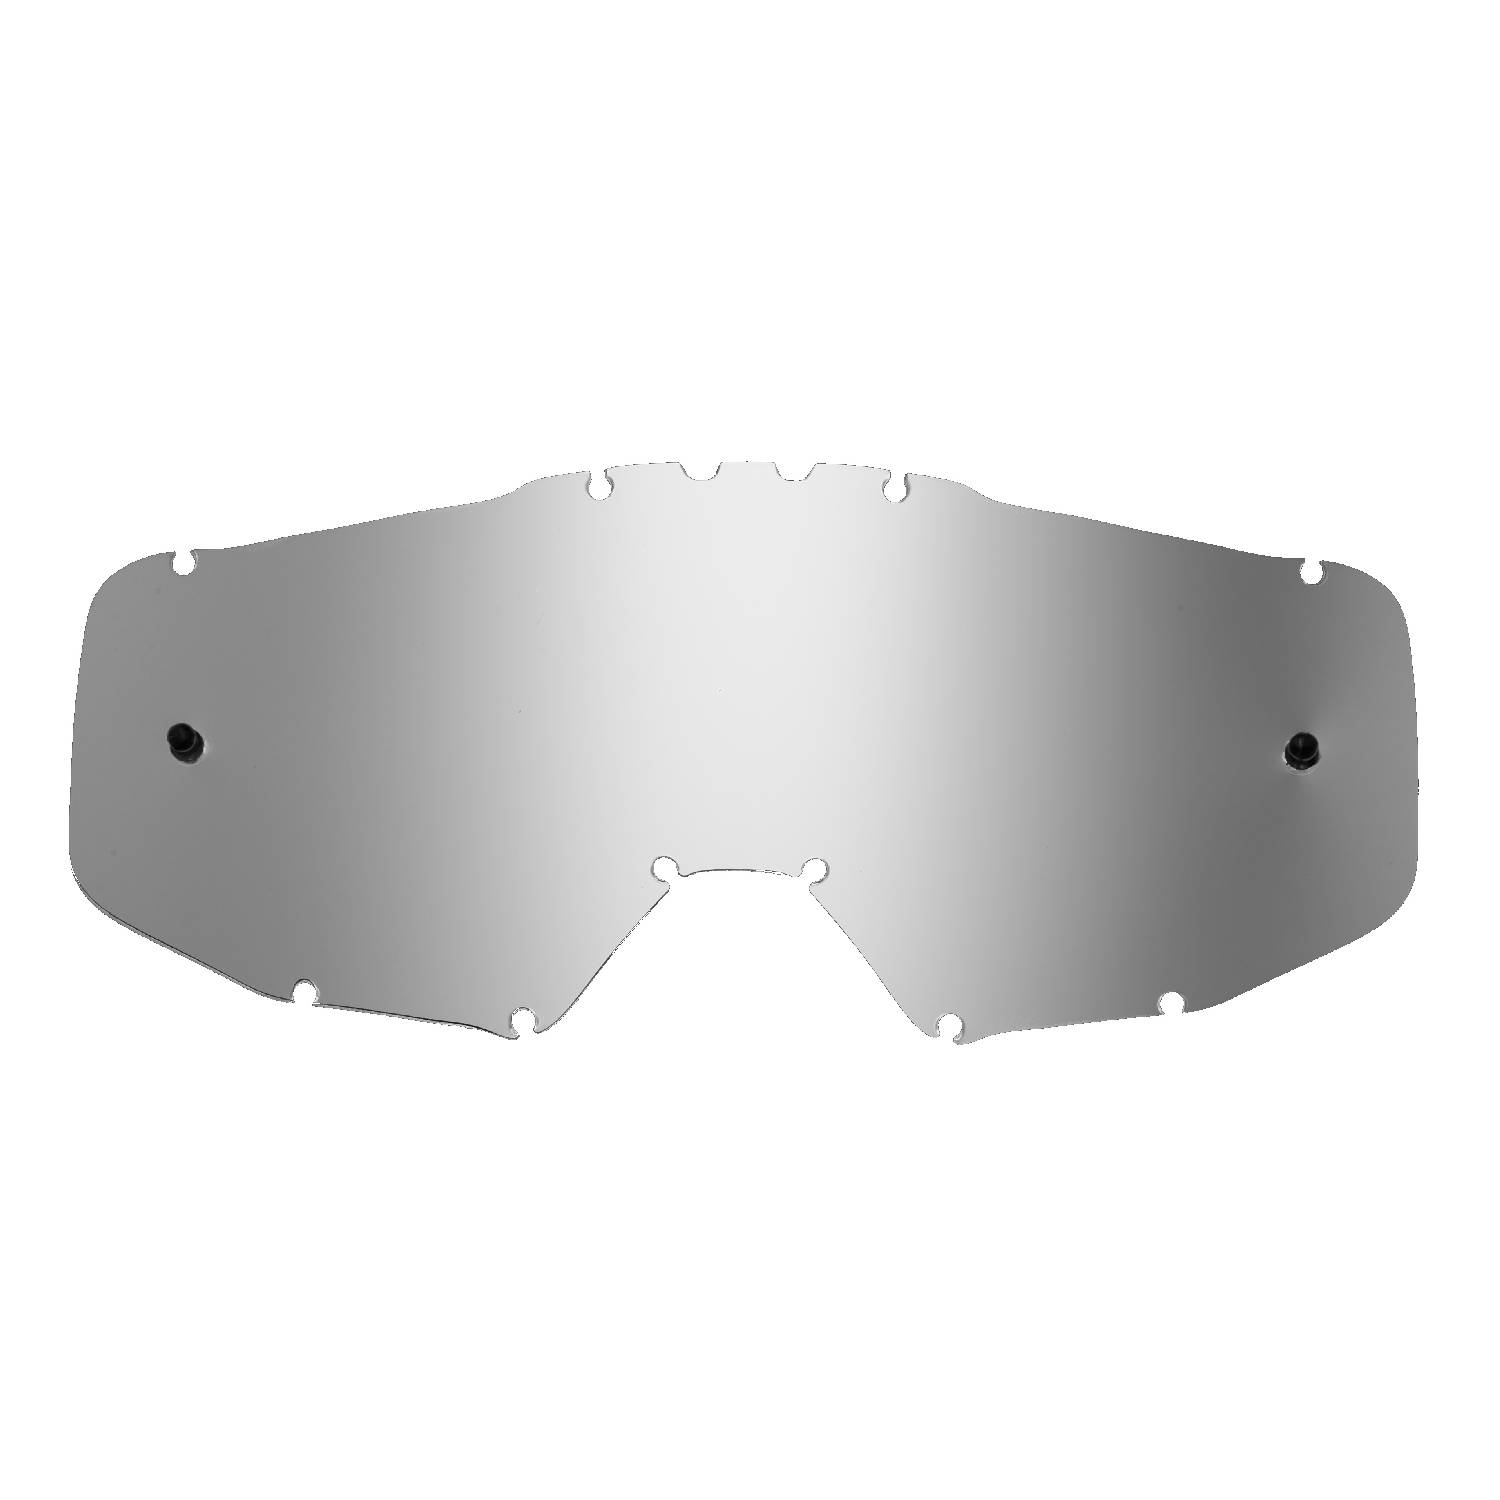 silver-toned mirrored replacement lenses for goggles compatible for Just1 Iris / Vitro goggle